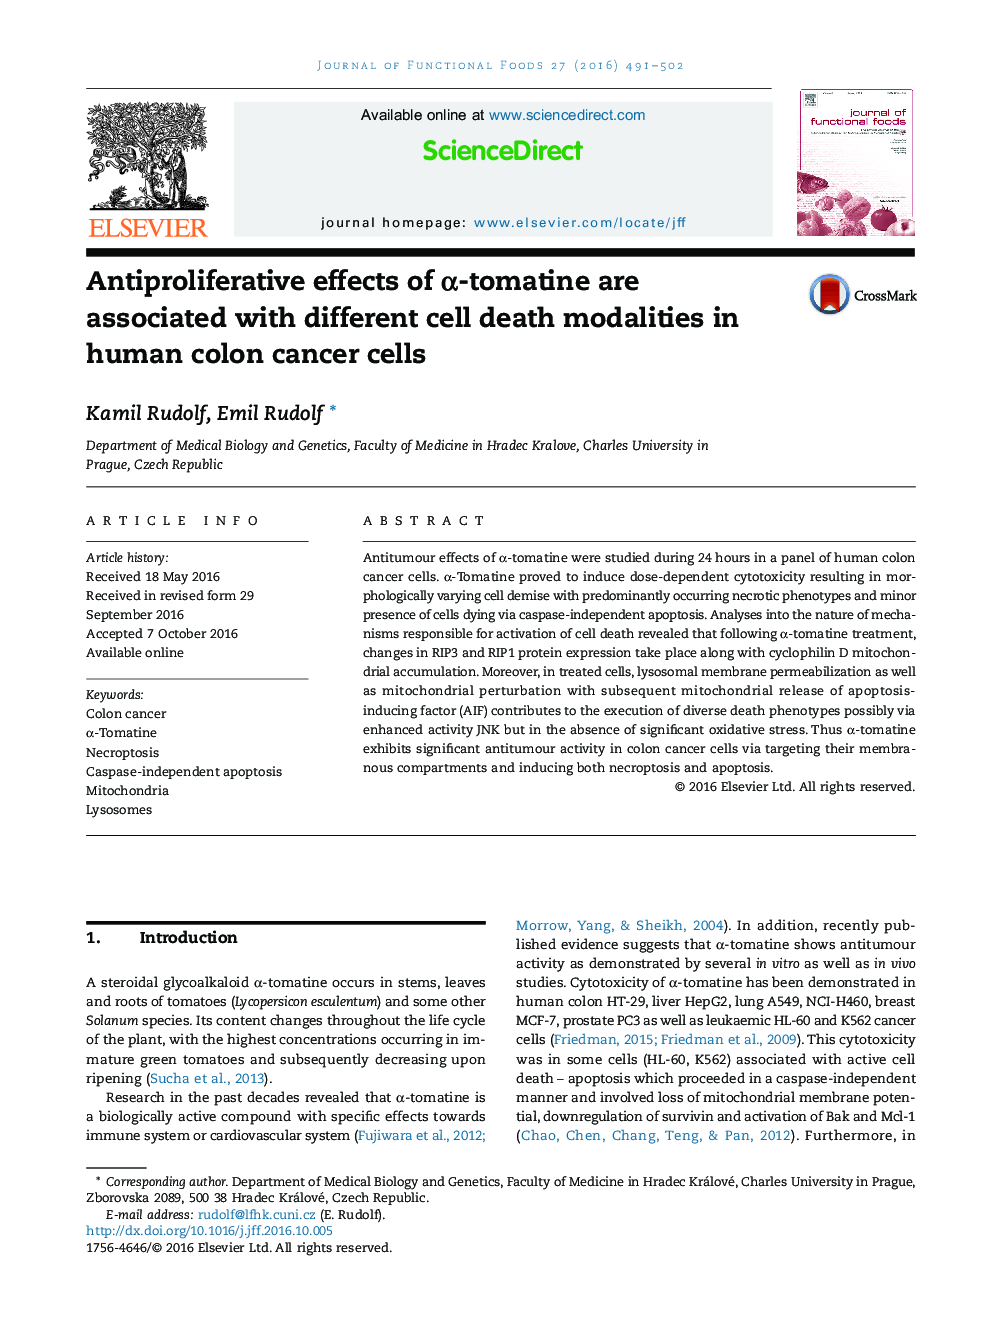 Antiproliferative effects of Î±-tomatine are associated with different cell death modalities in human colon cancer cells